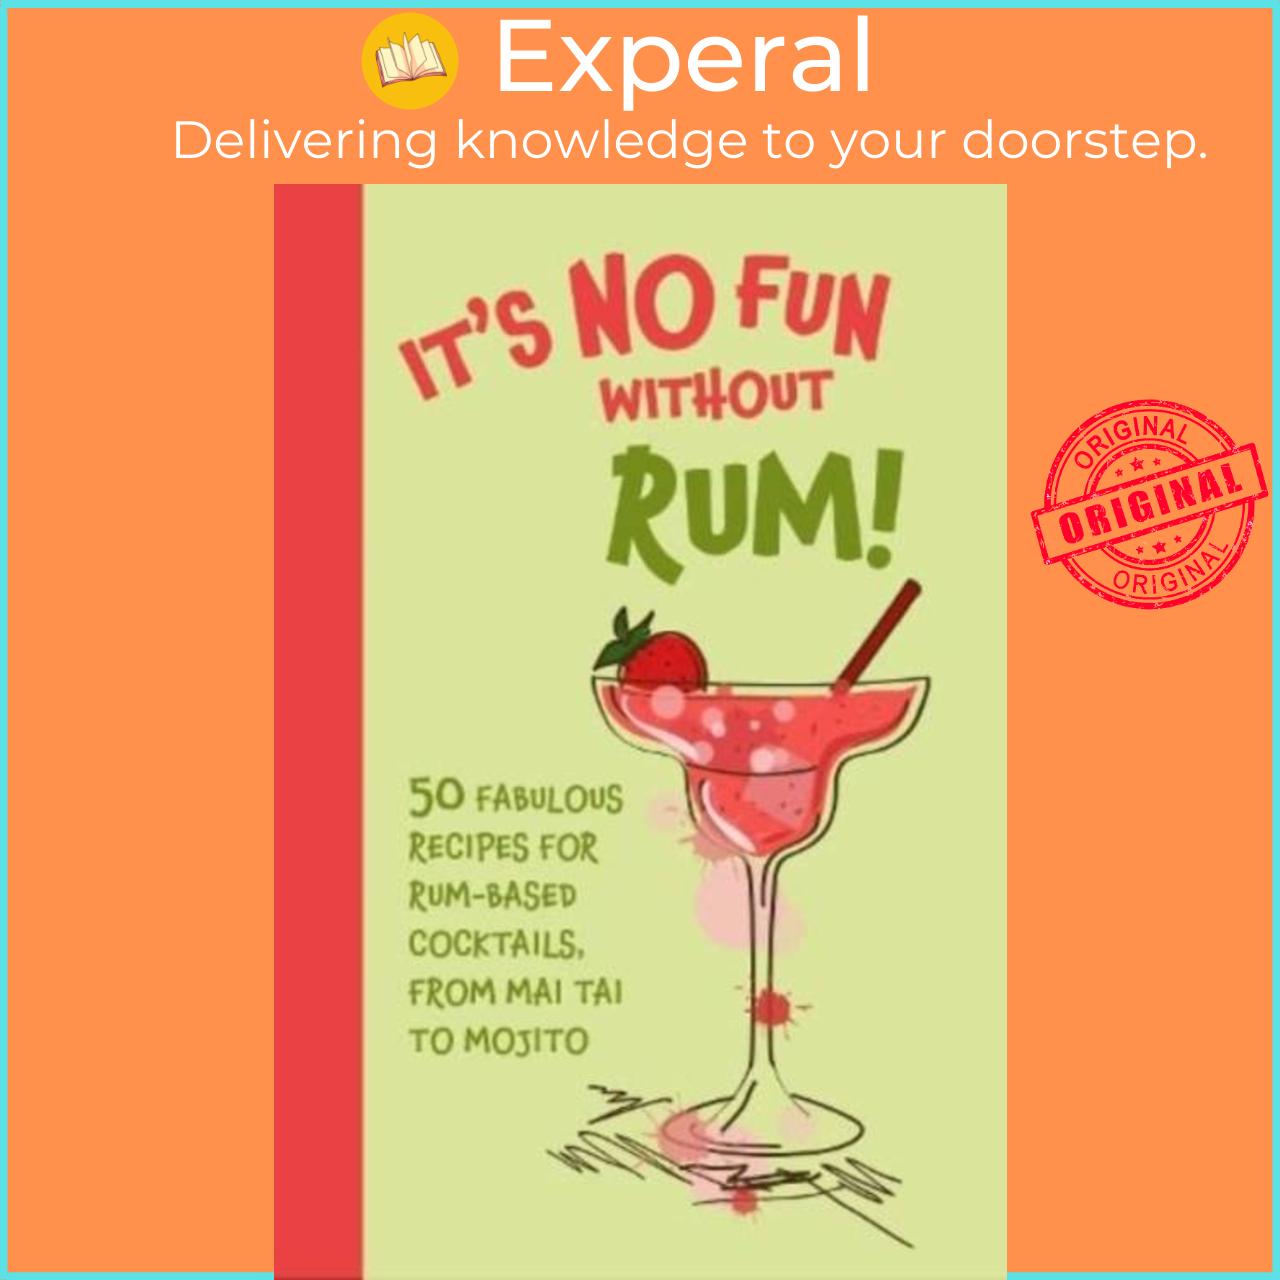 Sách - It's No Fun Without Rum! - 50 Fabulous Recipes for Rum-Based Cockta by Dog 'n' Bone Books (UK edition, hardcover)